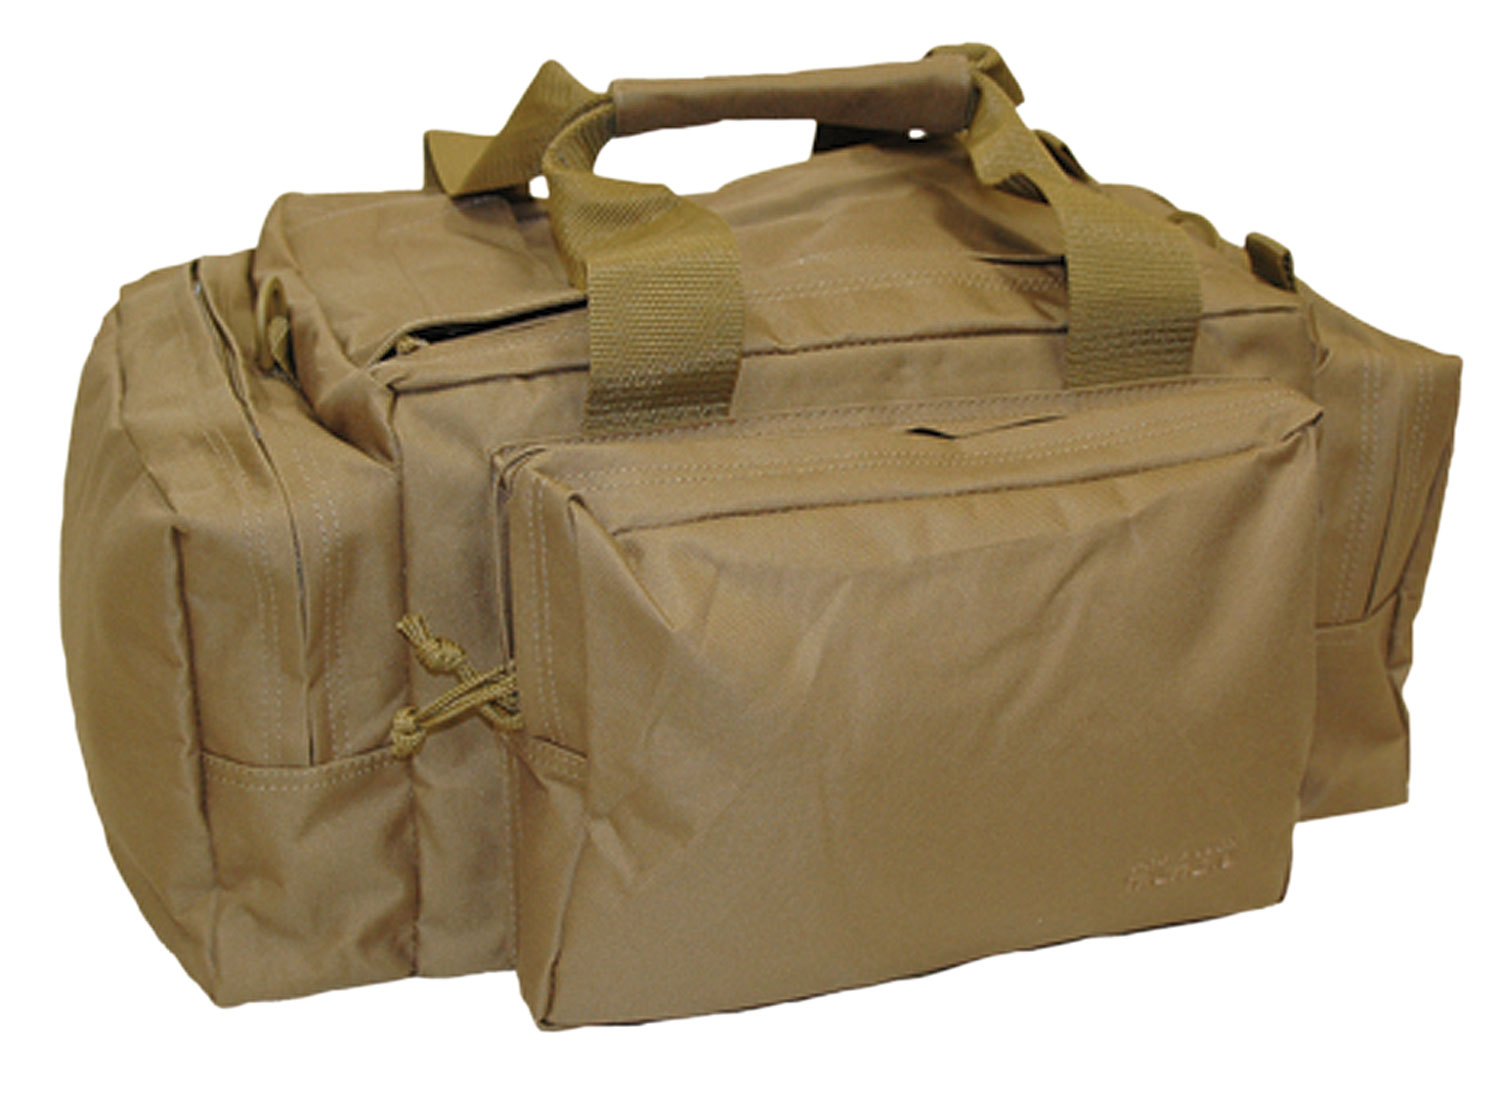 Bob Allen 79015 Max-Ops Tactical Range Bag Water Resistant Coated Tan Polyester with Storage Pockets, Foam Padding & Webbing Carry Handles 20